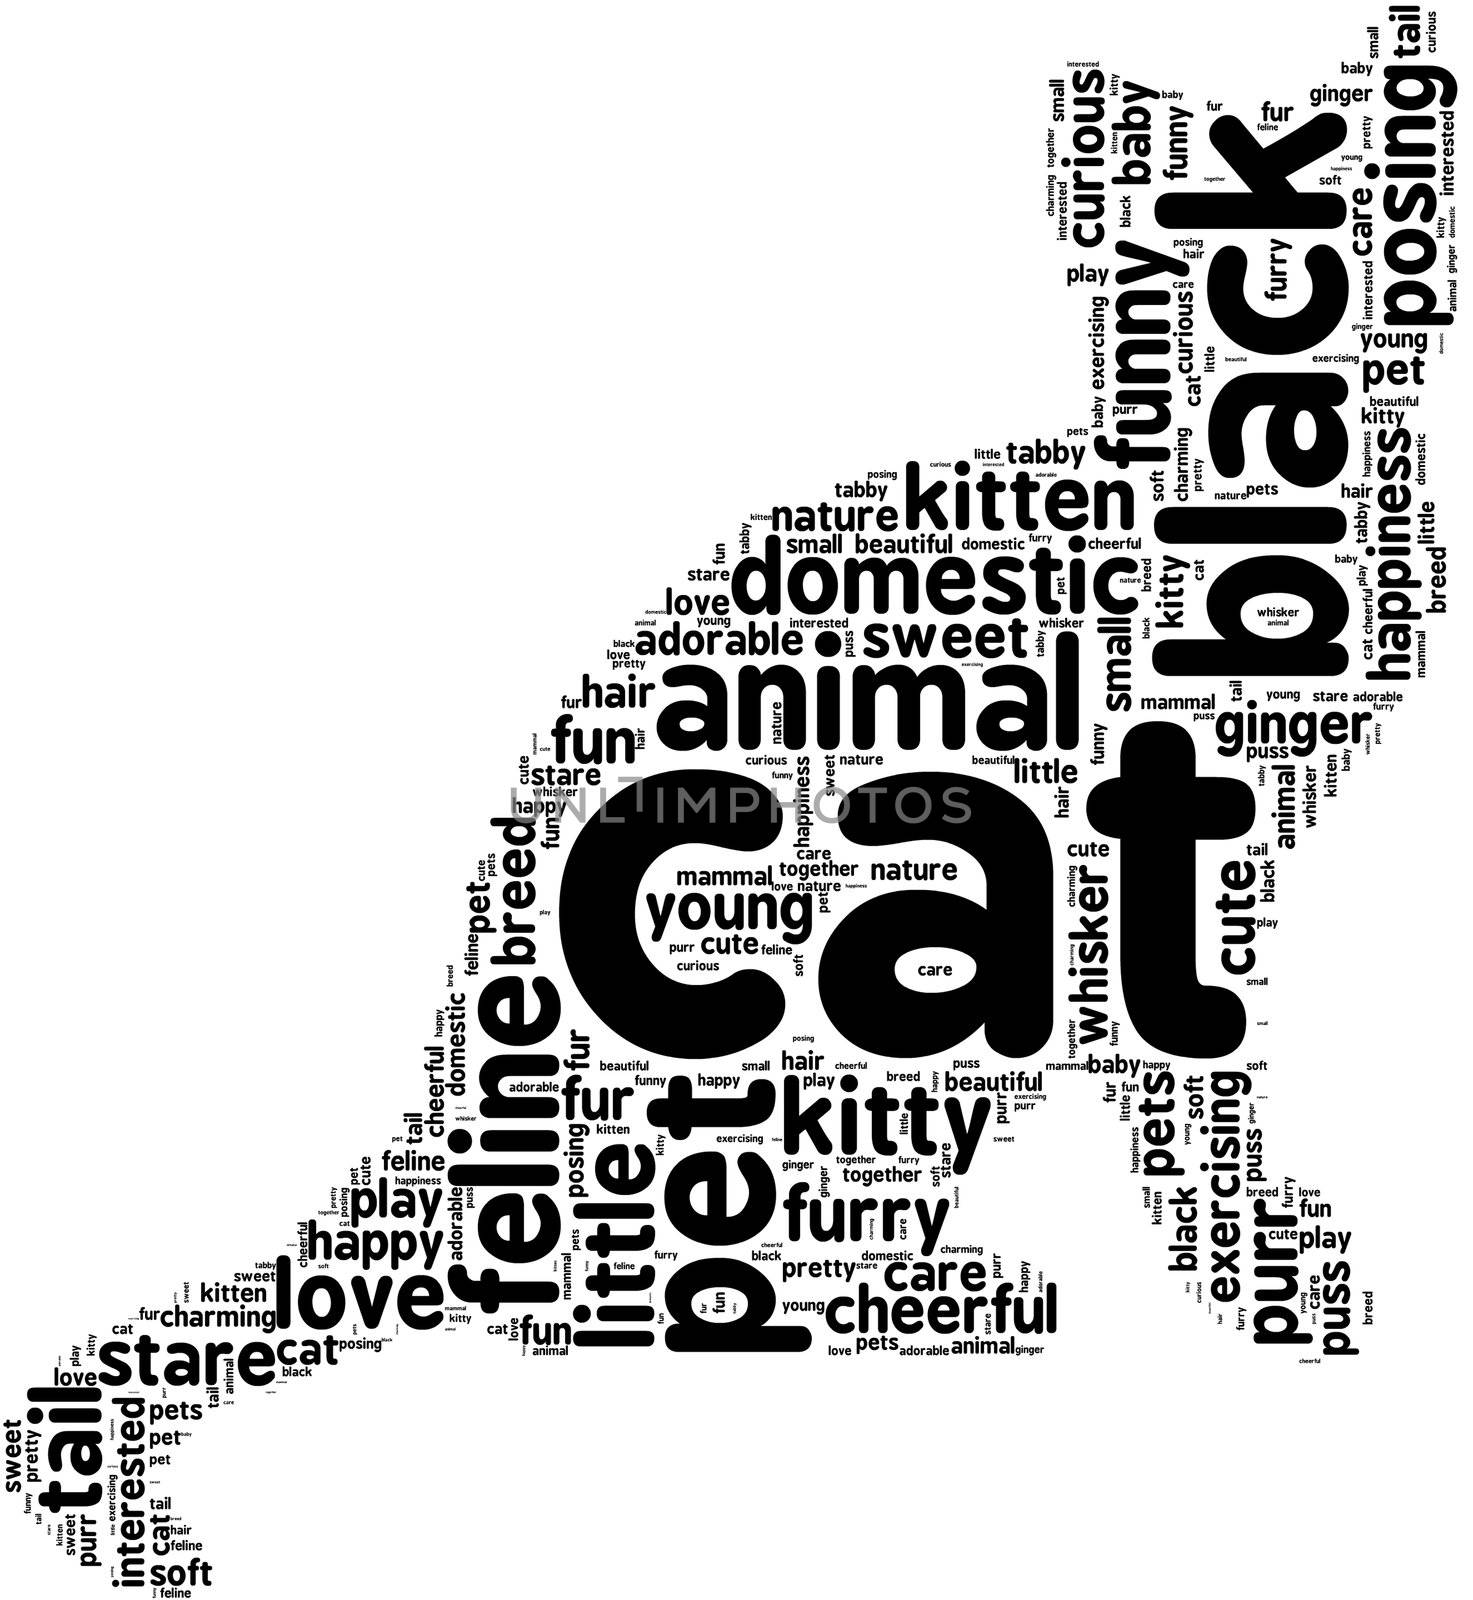 black cat word cloud illustration on a white background